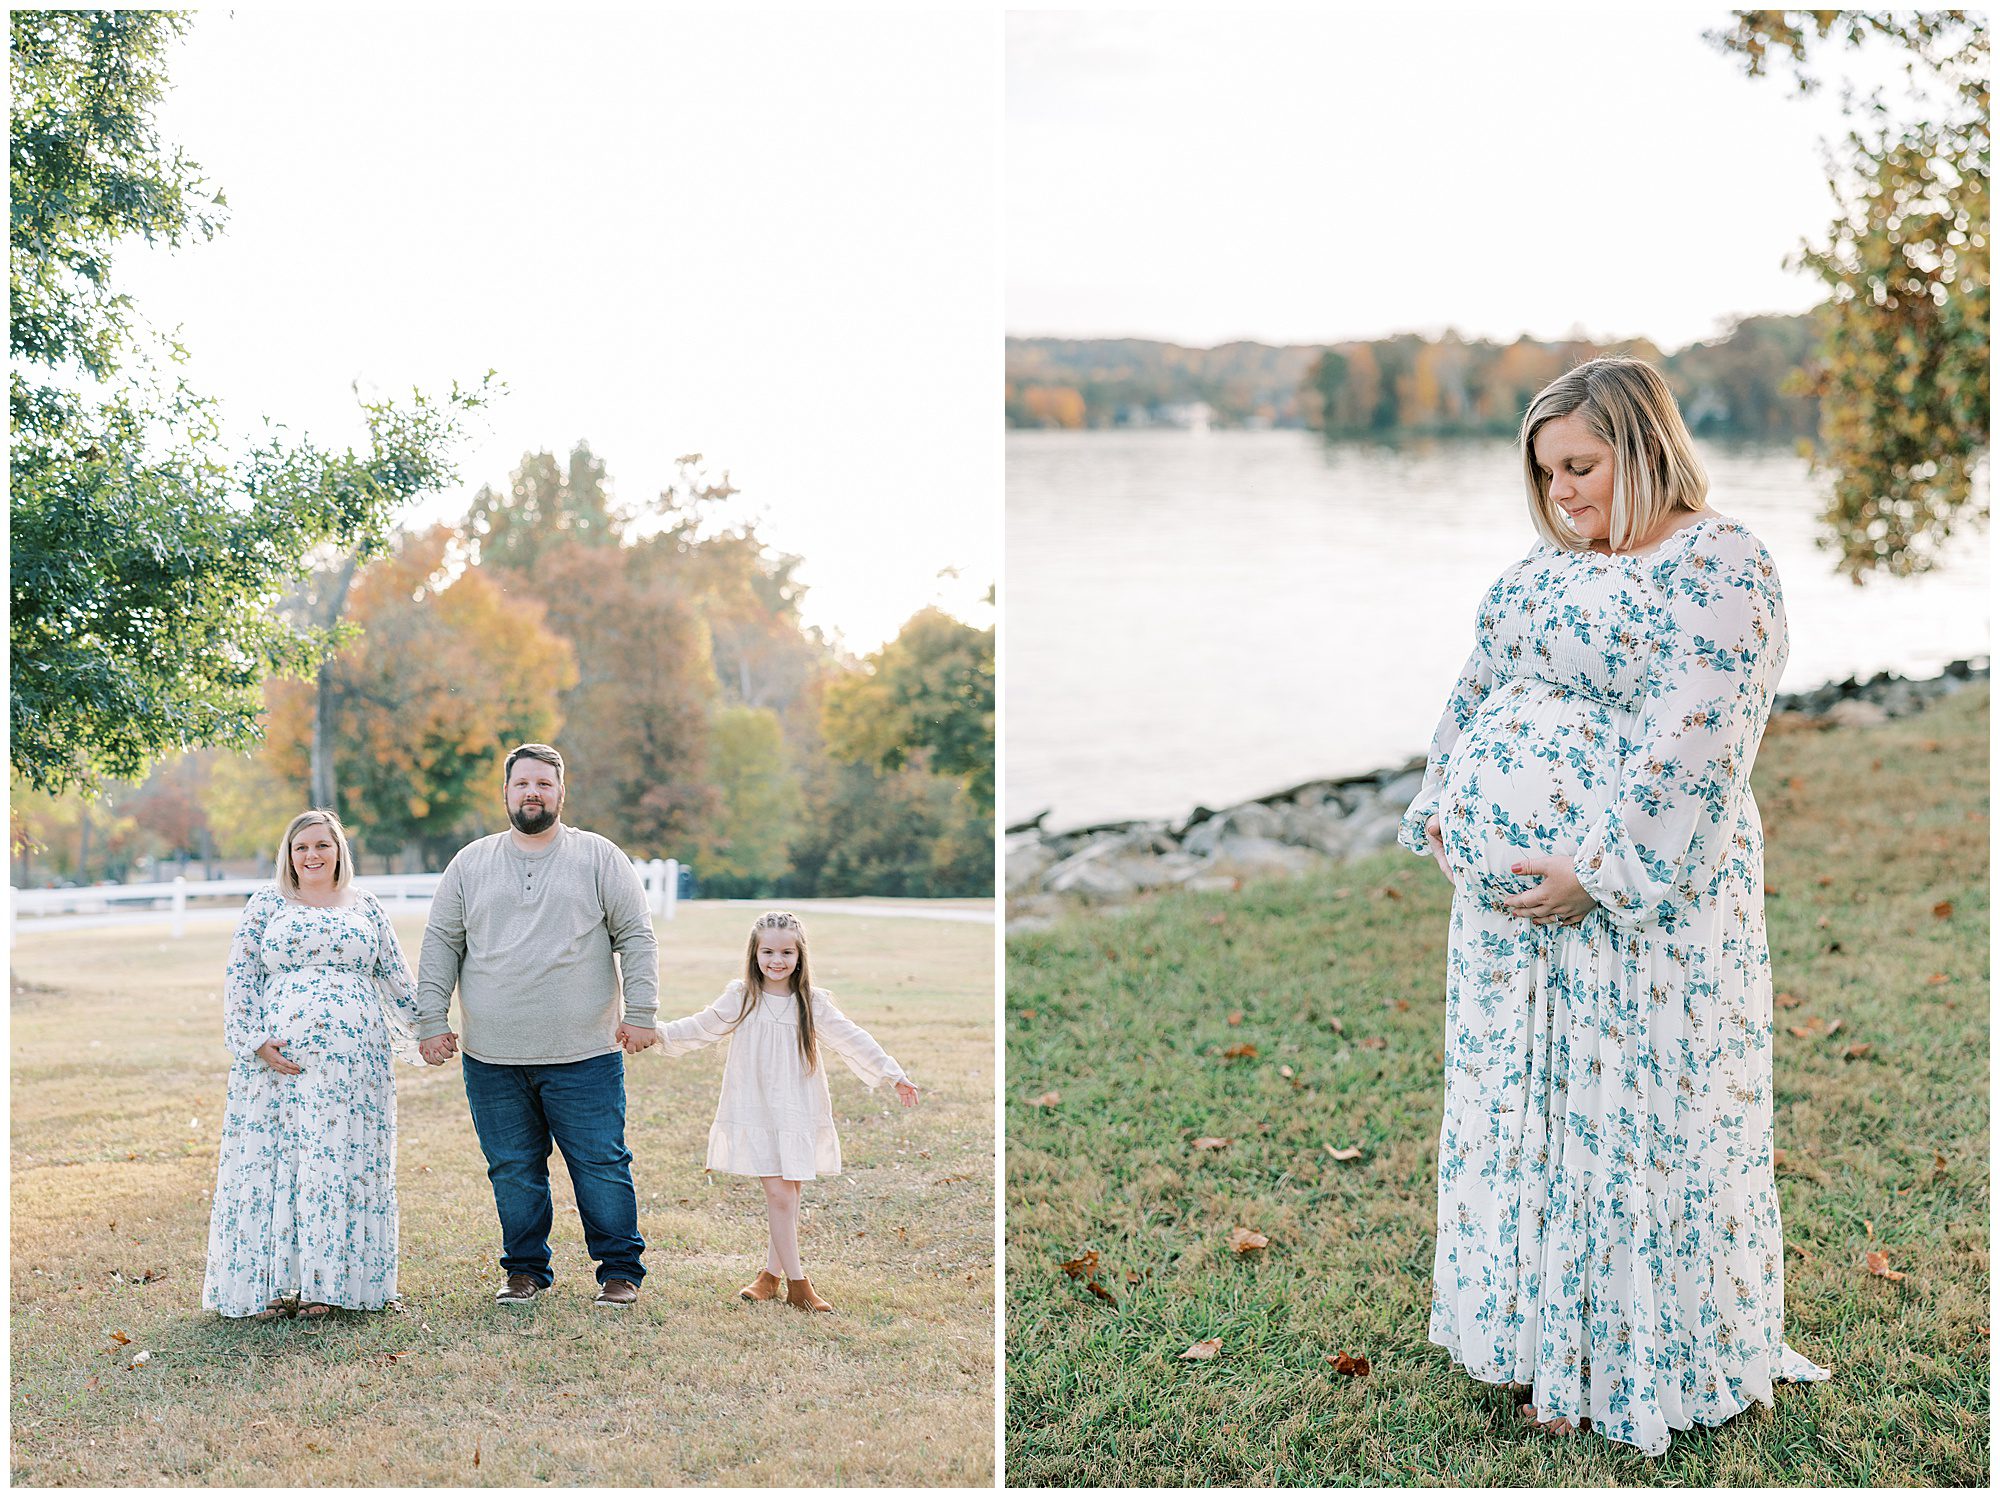 maternity photo session at the lake in knoxville, tn